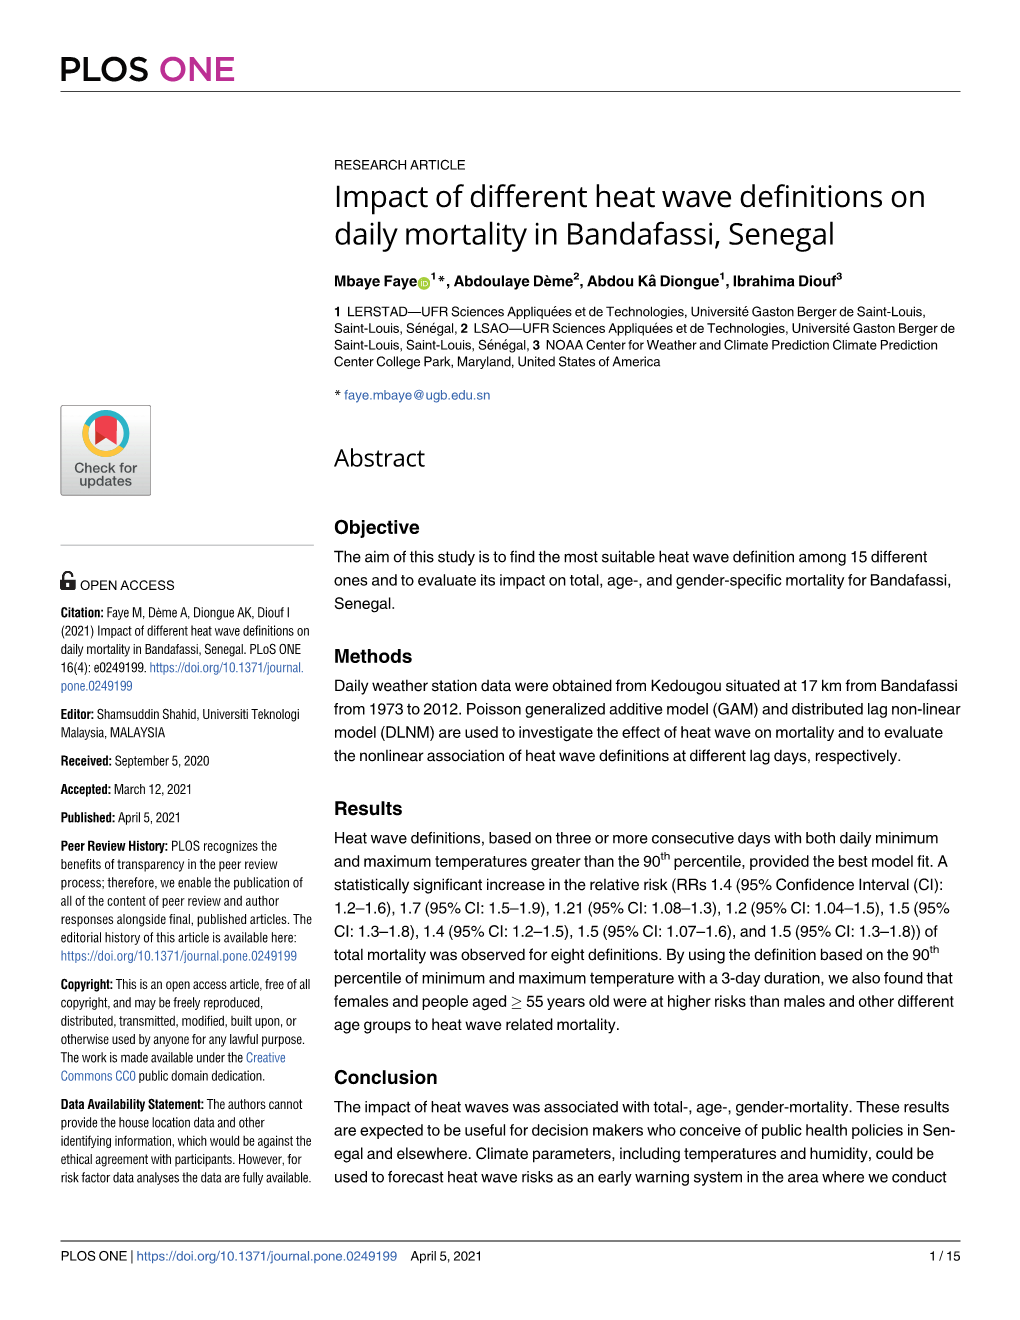 Impact of Different Heat Wave Definitions on Daily Mortality in Bandafassi, Senegal